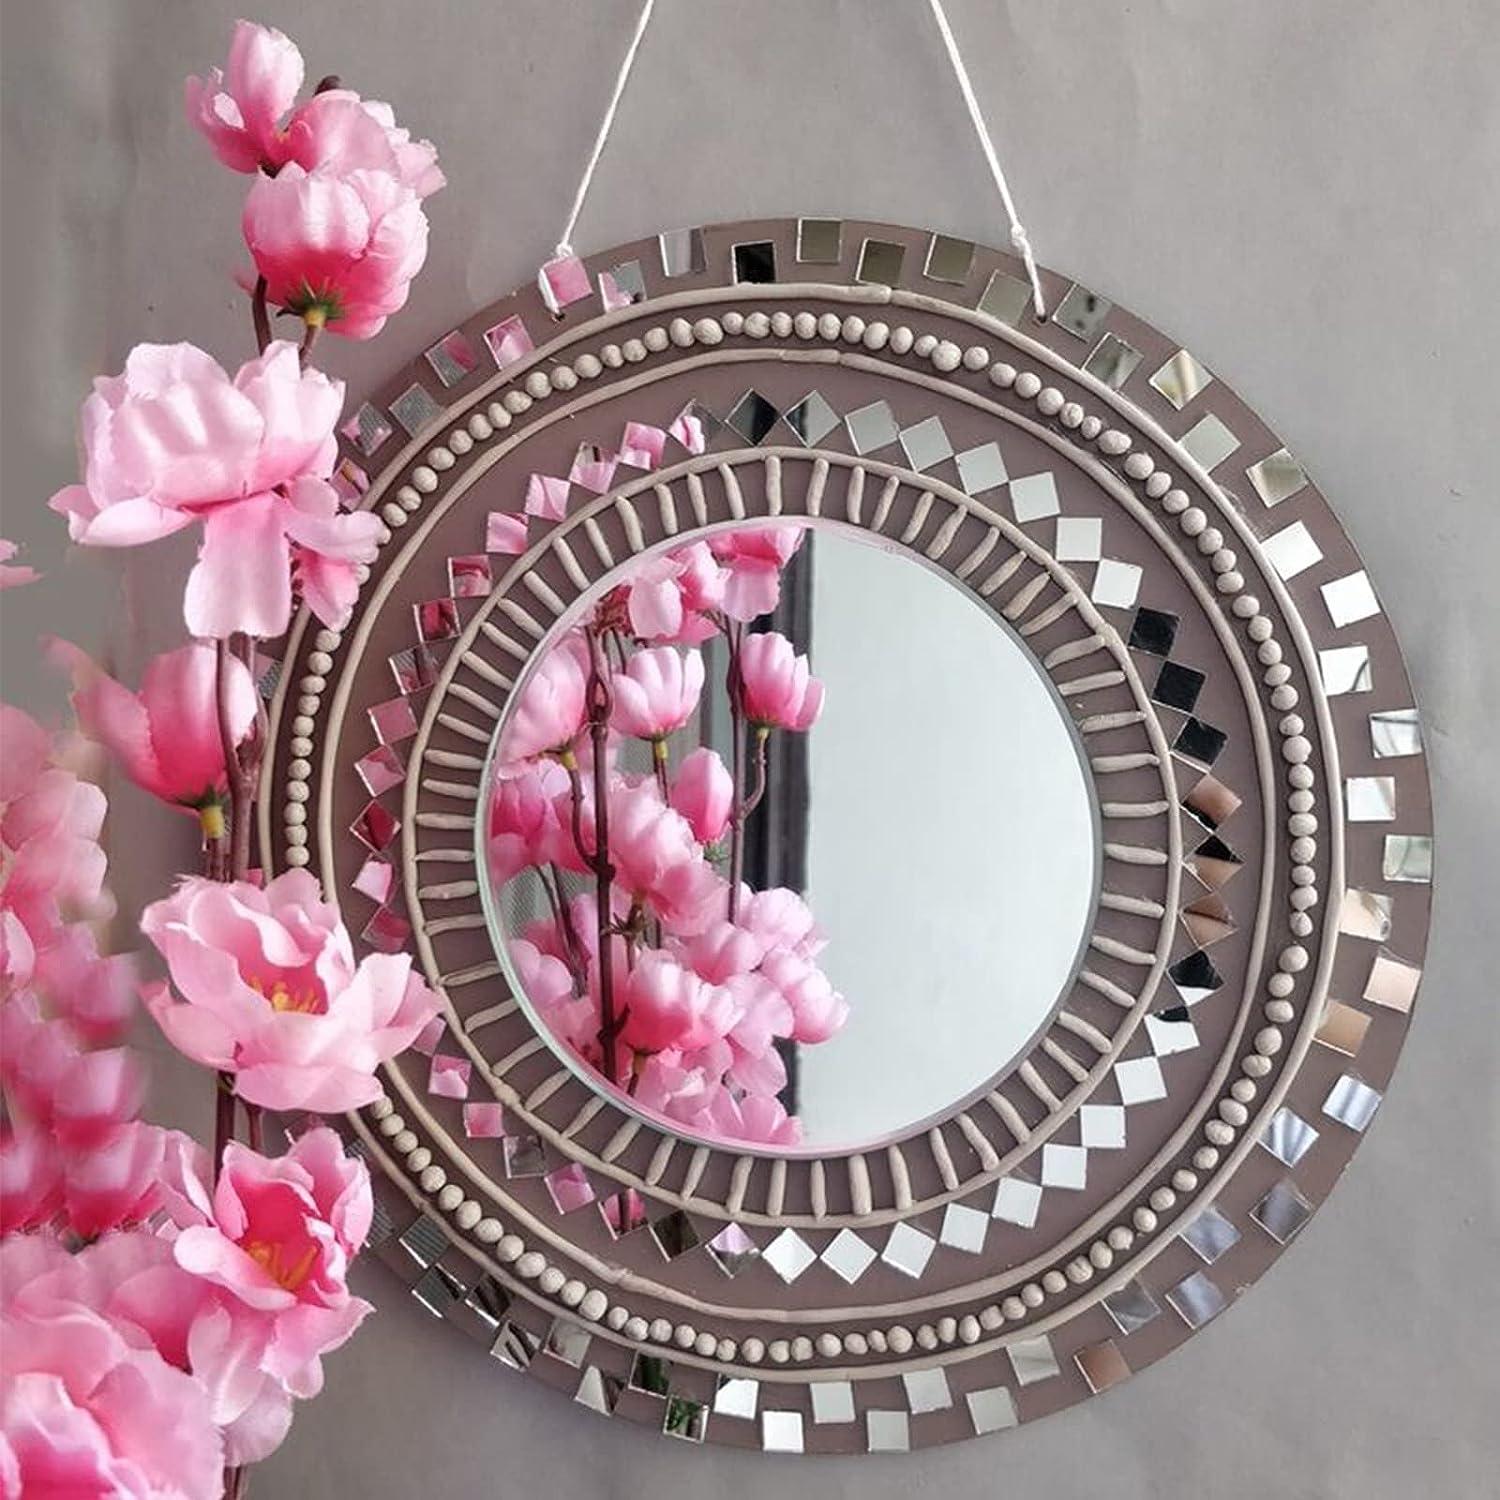 YOUEON 200pcs 1 Inch Small Round Glass Mirrors, Small Mirrors for Crafts,  Mosaic Mirrors DIY Craft Mirrors Decorative Glass Mirror Tiles for Arts 